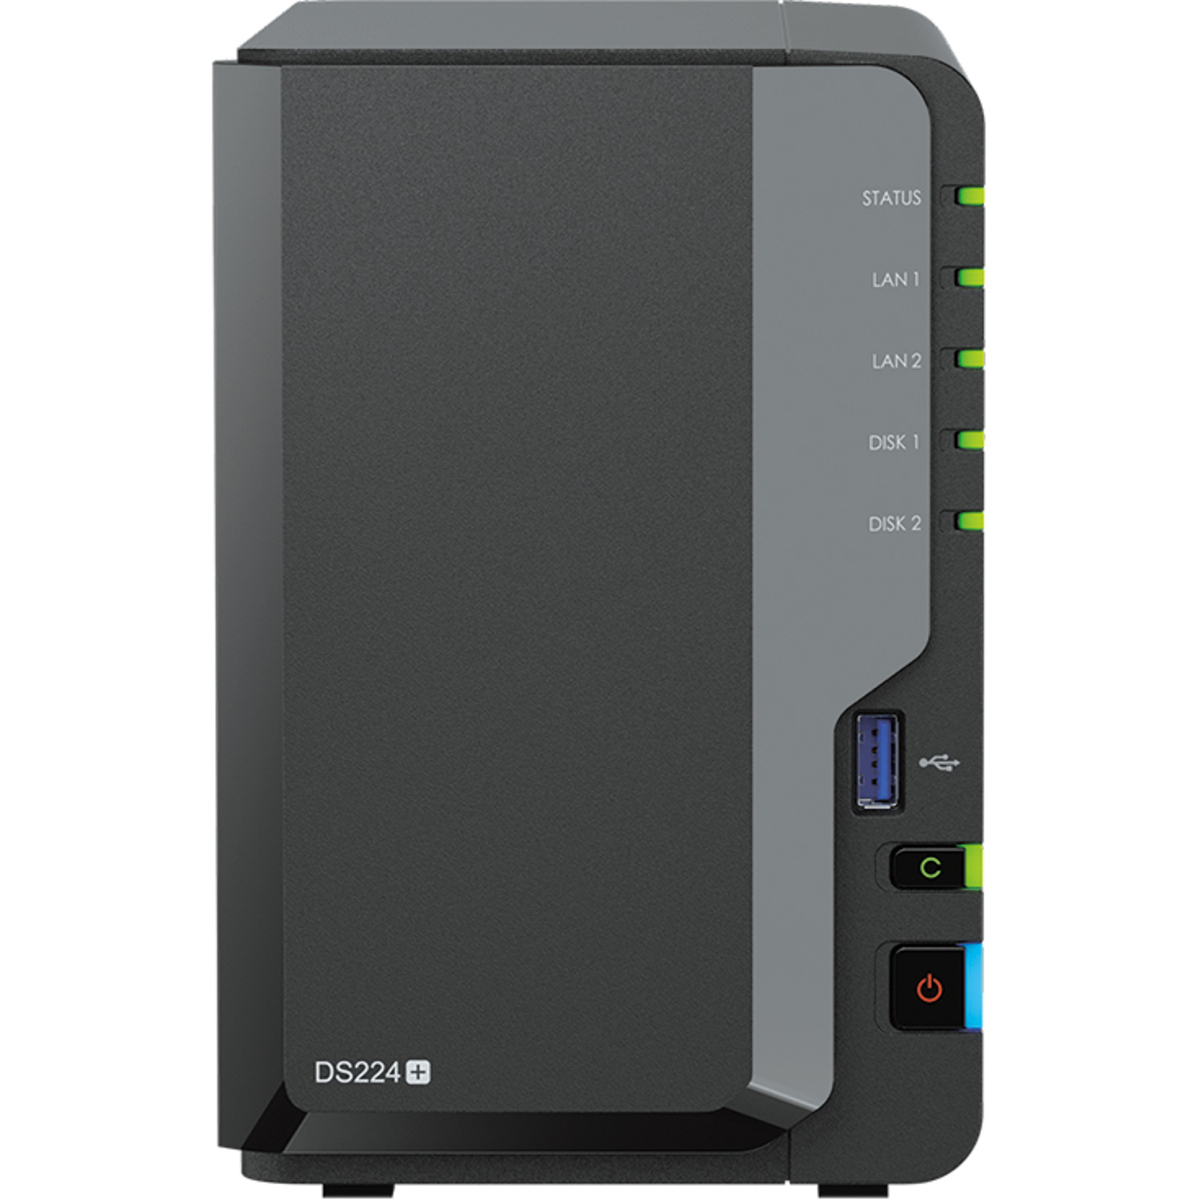 Synology DiskStation DS224+ 20tb 2-Bay Desktop Personal / Basic Home / Small Office NAS - Network Attached Storage Device 2x10tb Seagate IronWolf Pro ST10000NT001 3.5 7200rpm SATA 6Gb/s HDD NAS Class Drives Installed - Burn-In Tested - ON SALE - FREE RAM UPGRADE DiskStation DS224+